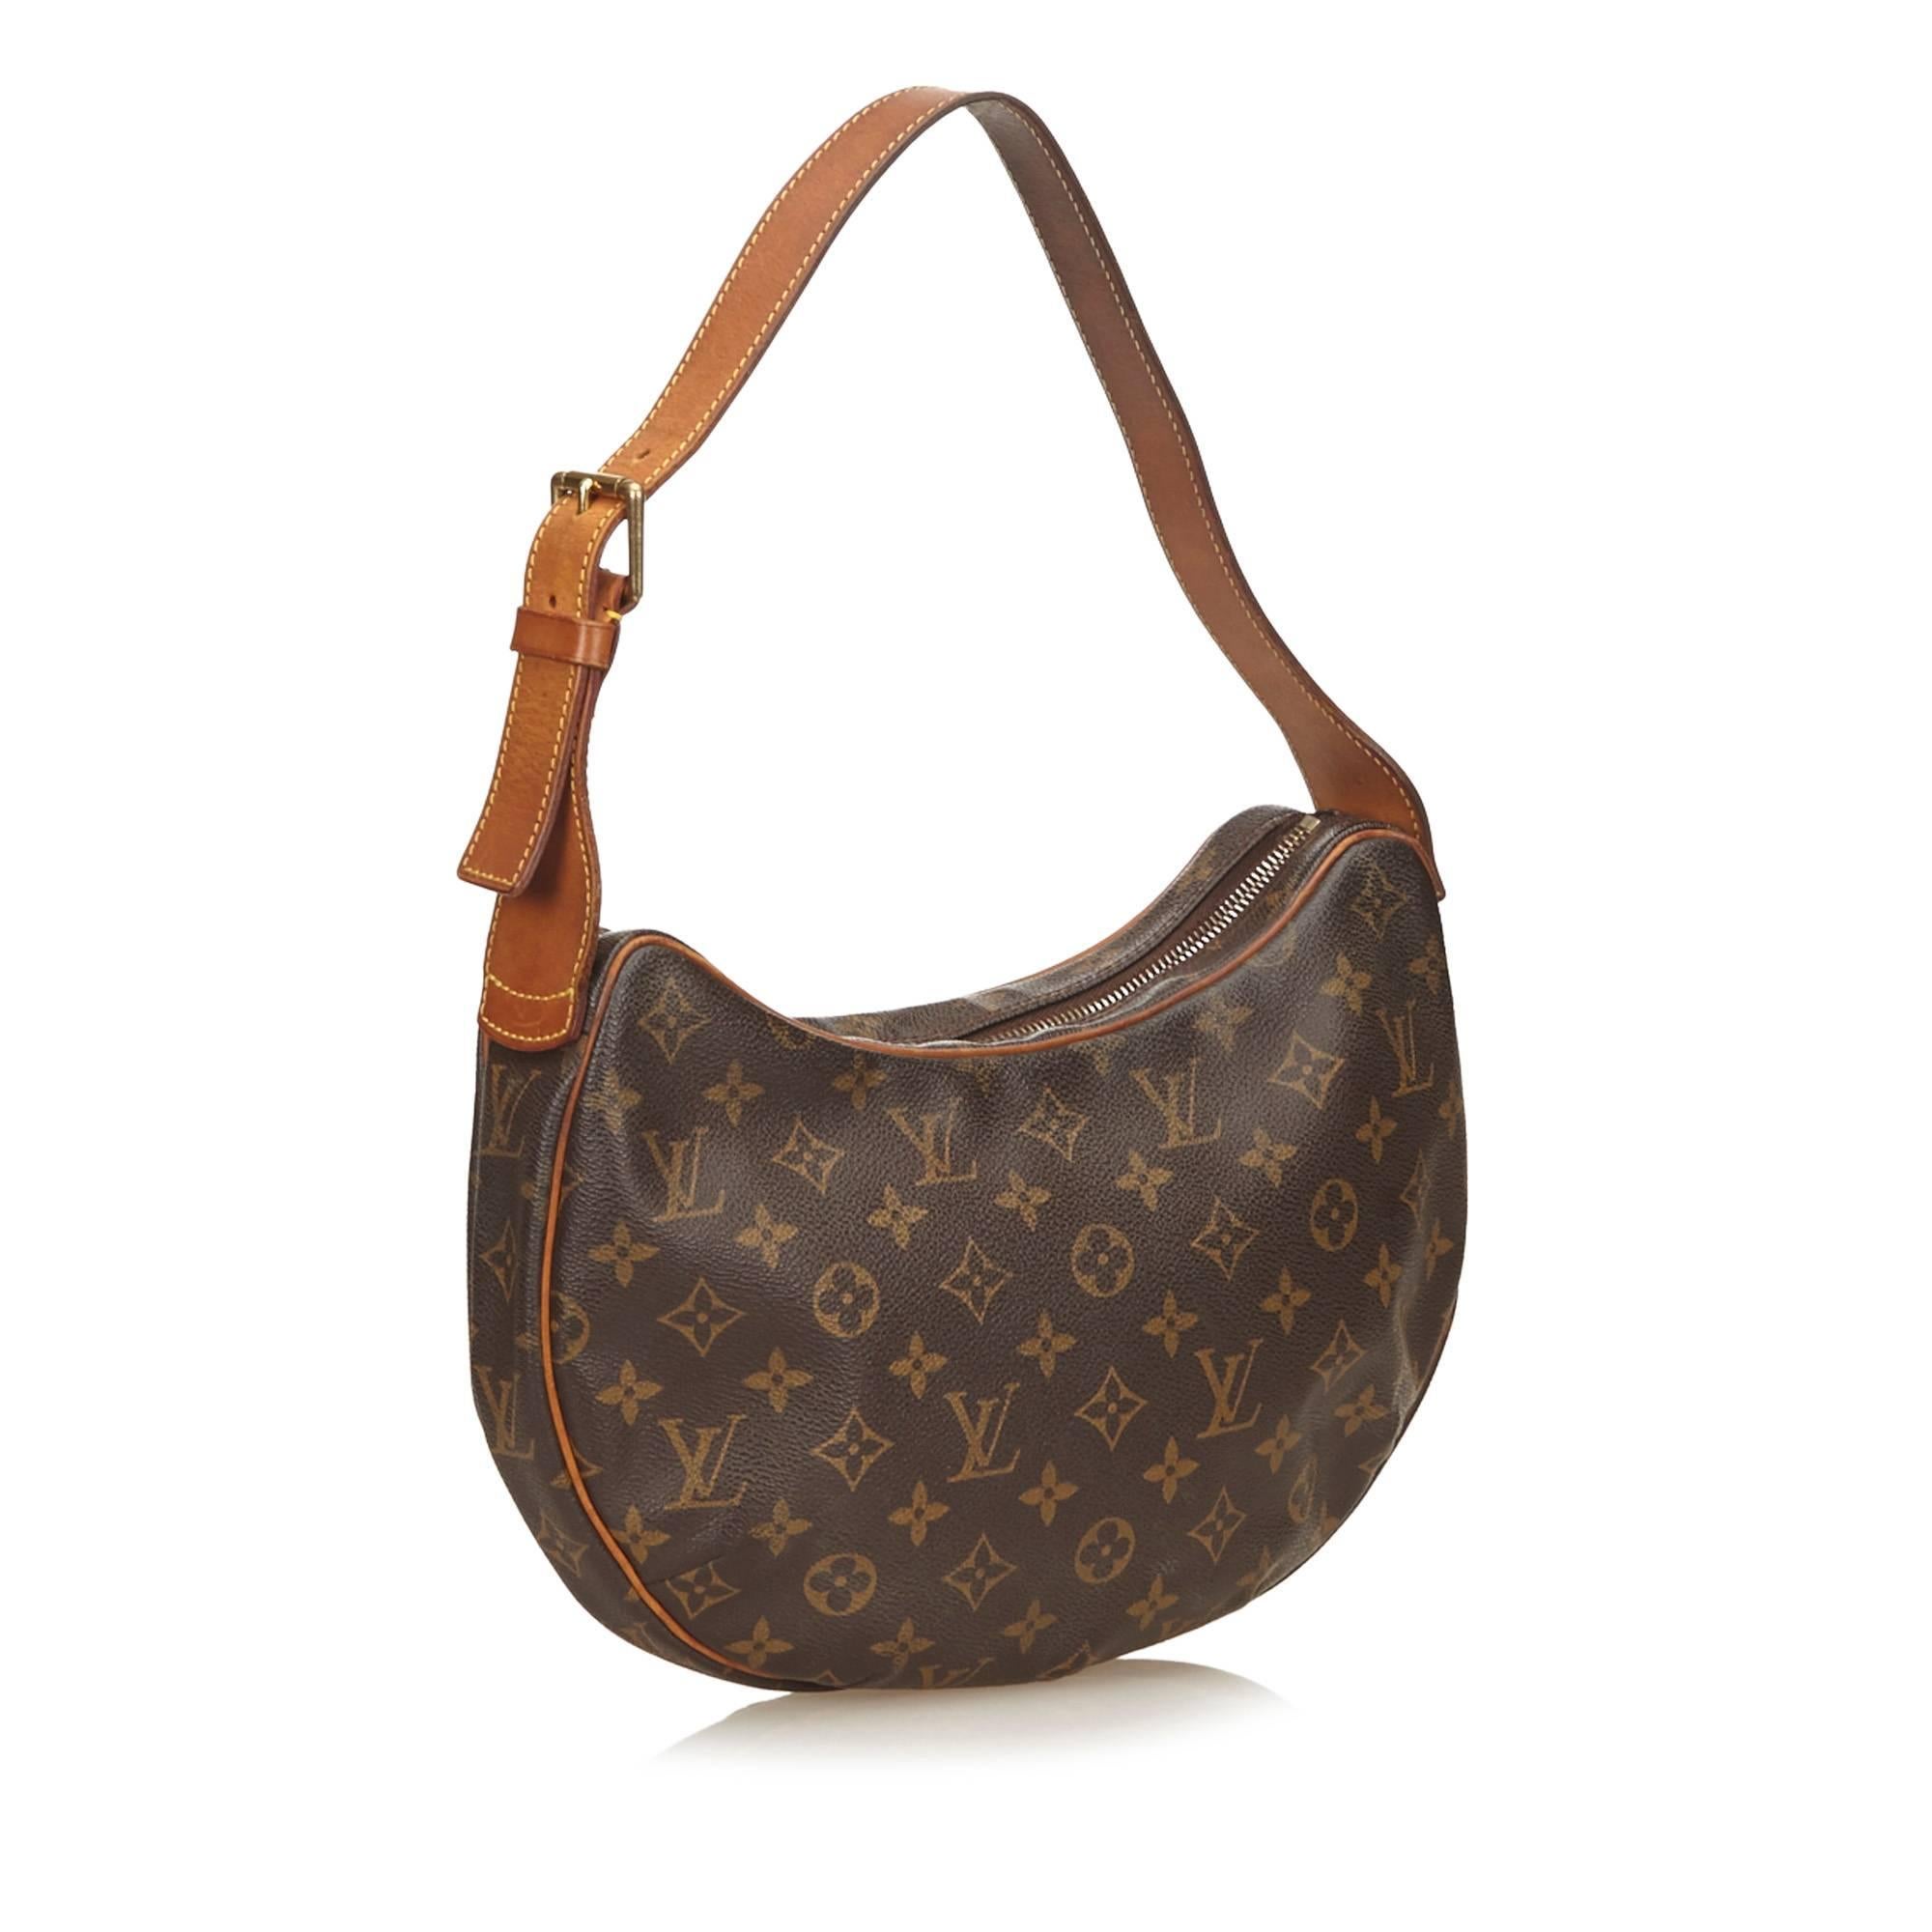 The Croissant MM features a monogram canvas body, a leather shoulder strap, a top zip closure, and an interior slip pocket. It carries a B condition rating.

Inclusions: 
Dust Bag